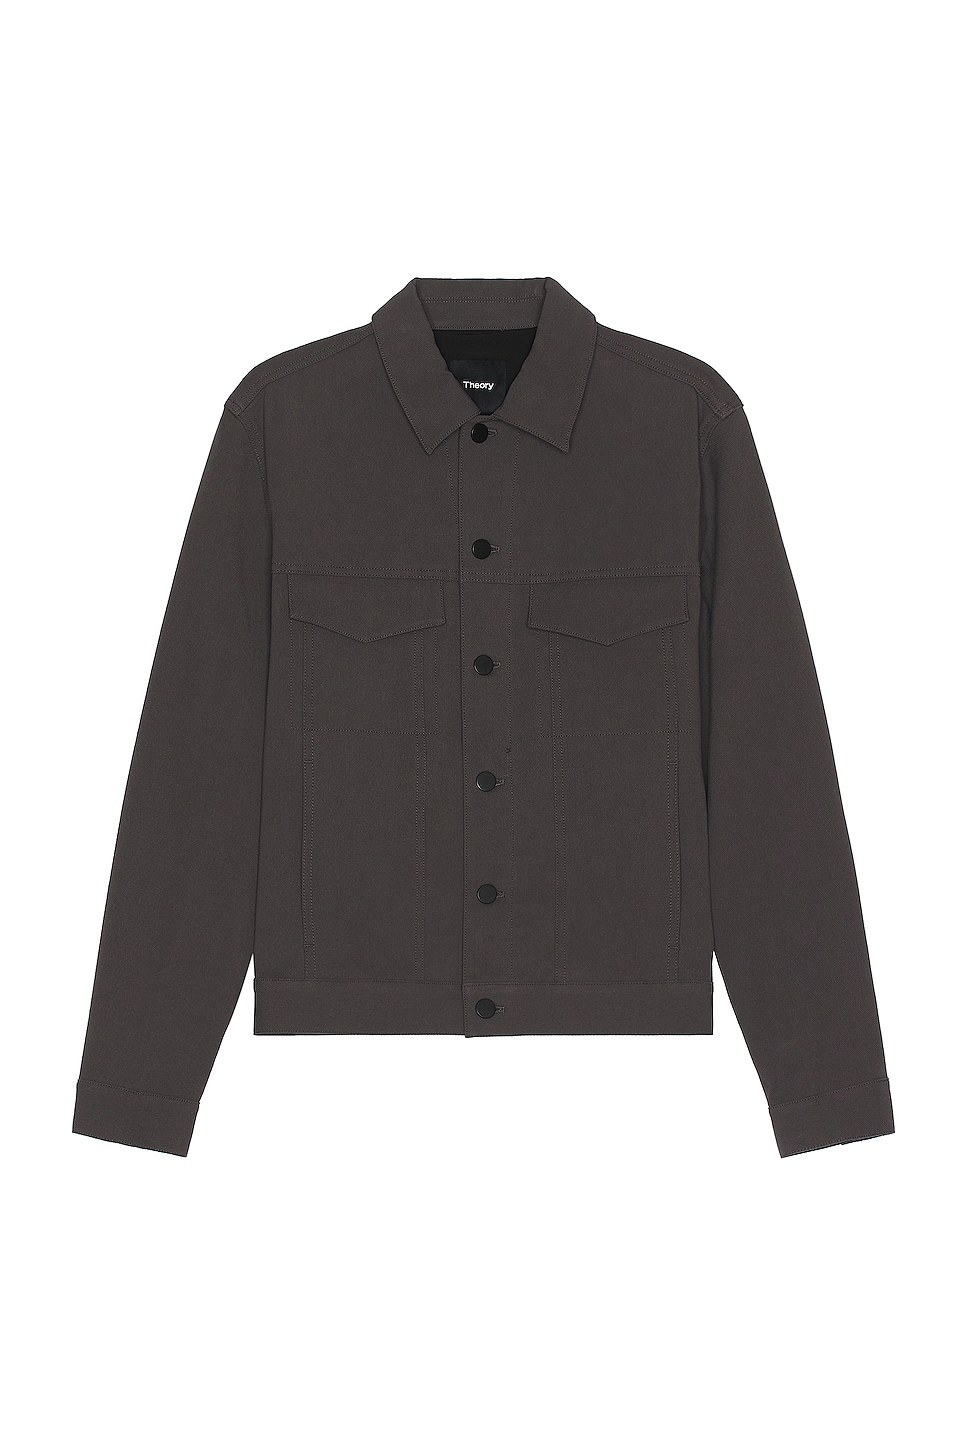 Image 1 of Theory River Neoteric Twill Jacket in Dark Grey